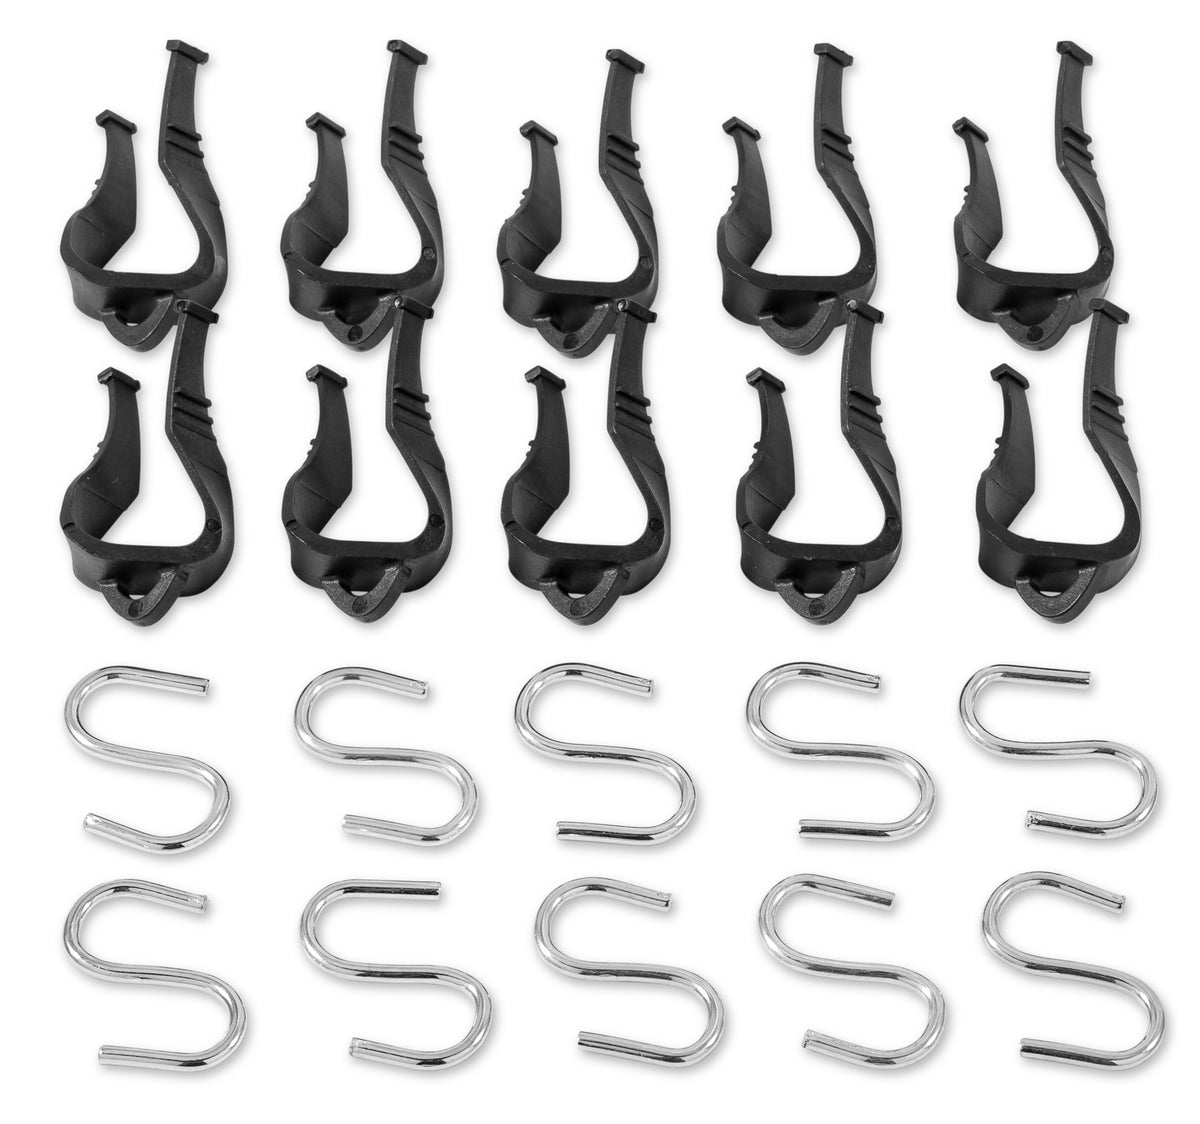 Camco 42707 RV Awning Accessory Hangers - Pack of 10